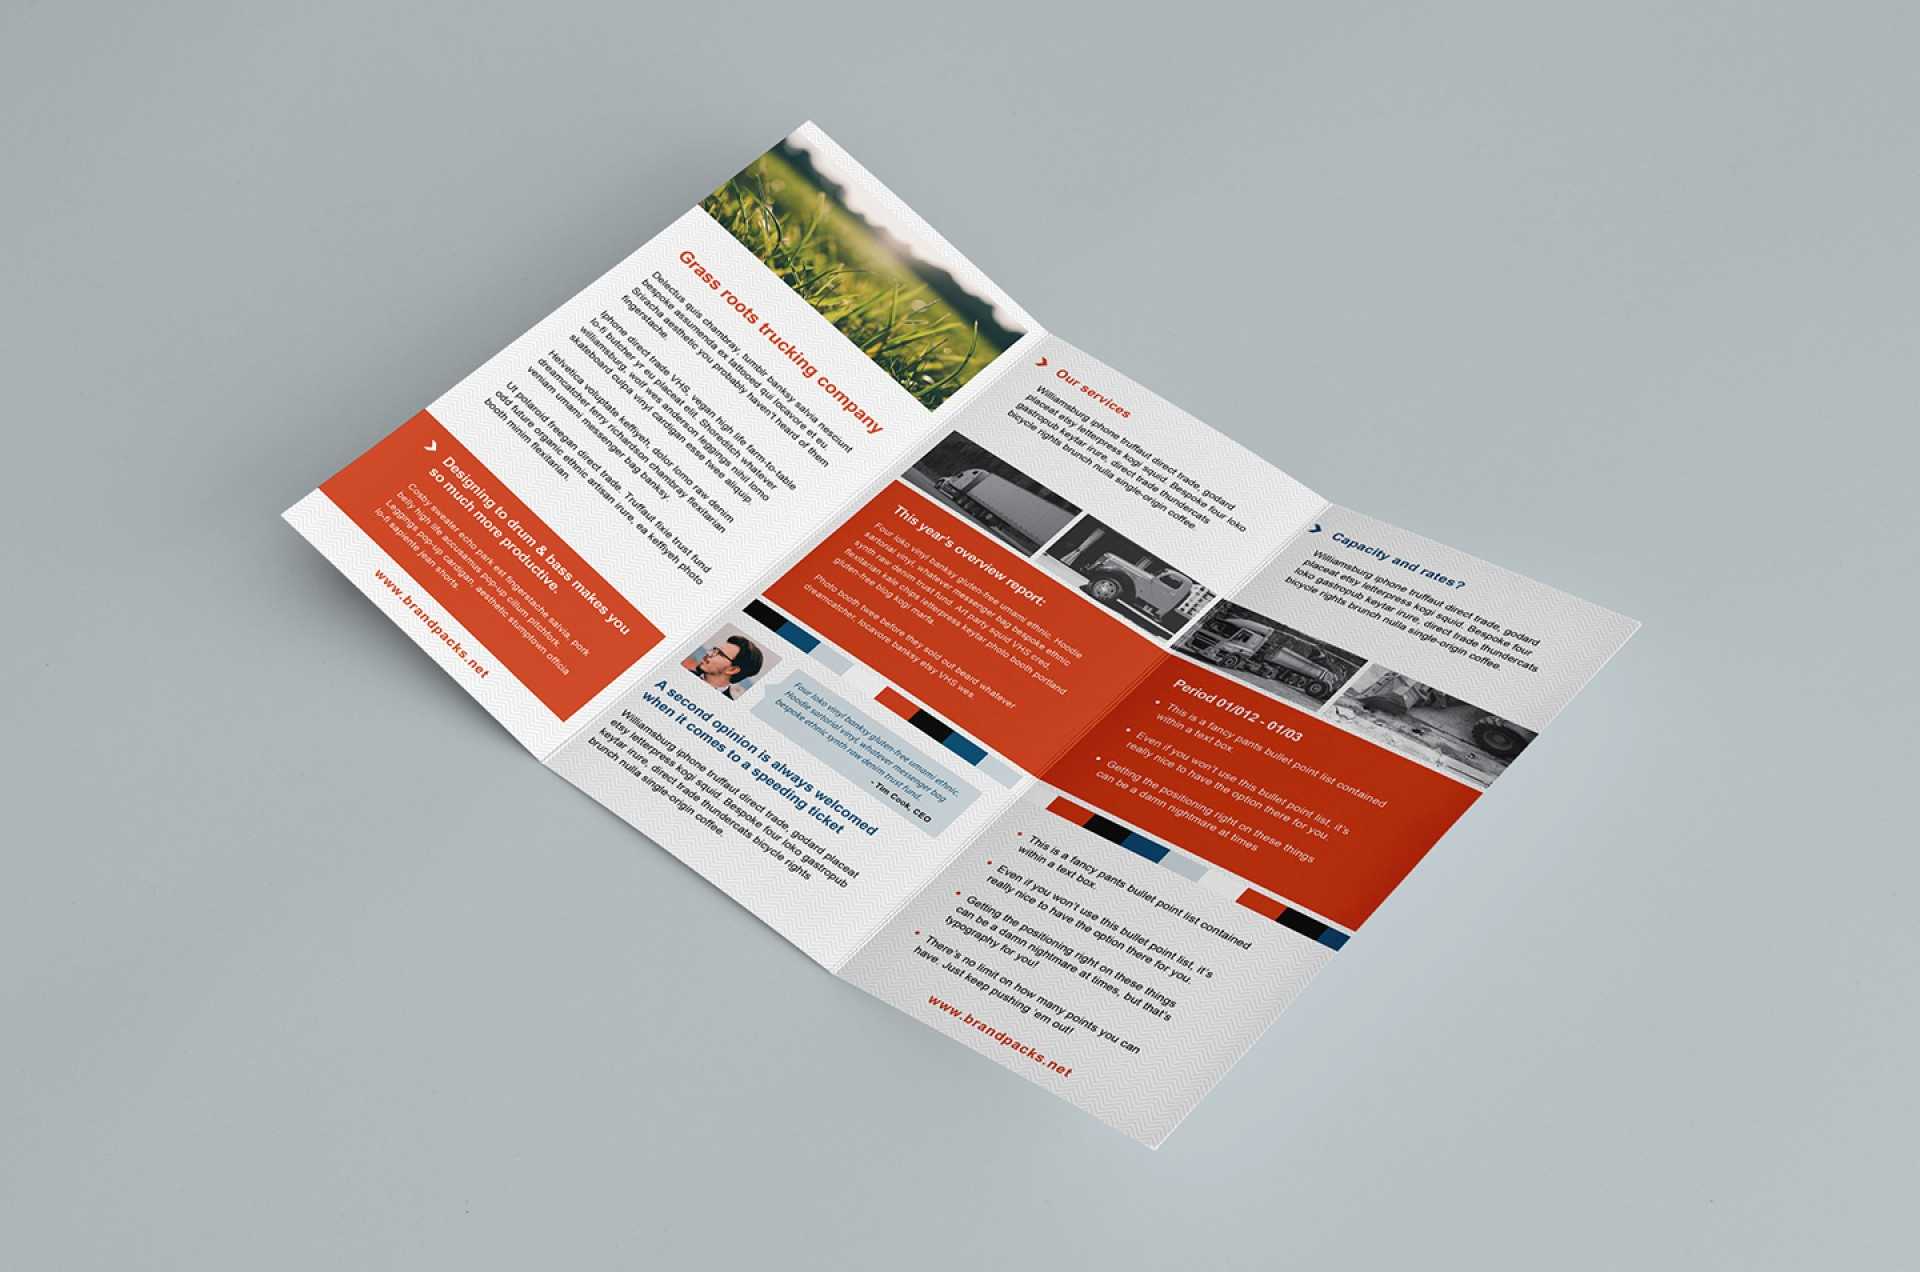 022 Free Multipurpose Trifold Brochure Template Tri Fold With Regard To Pop Up Brochure Template